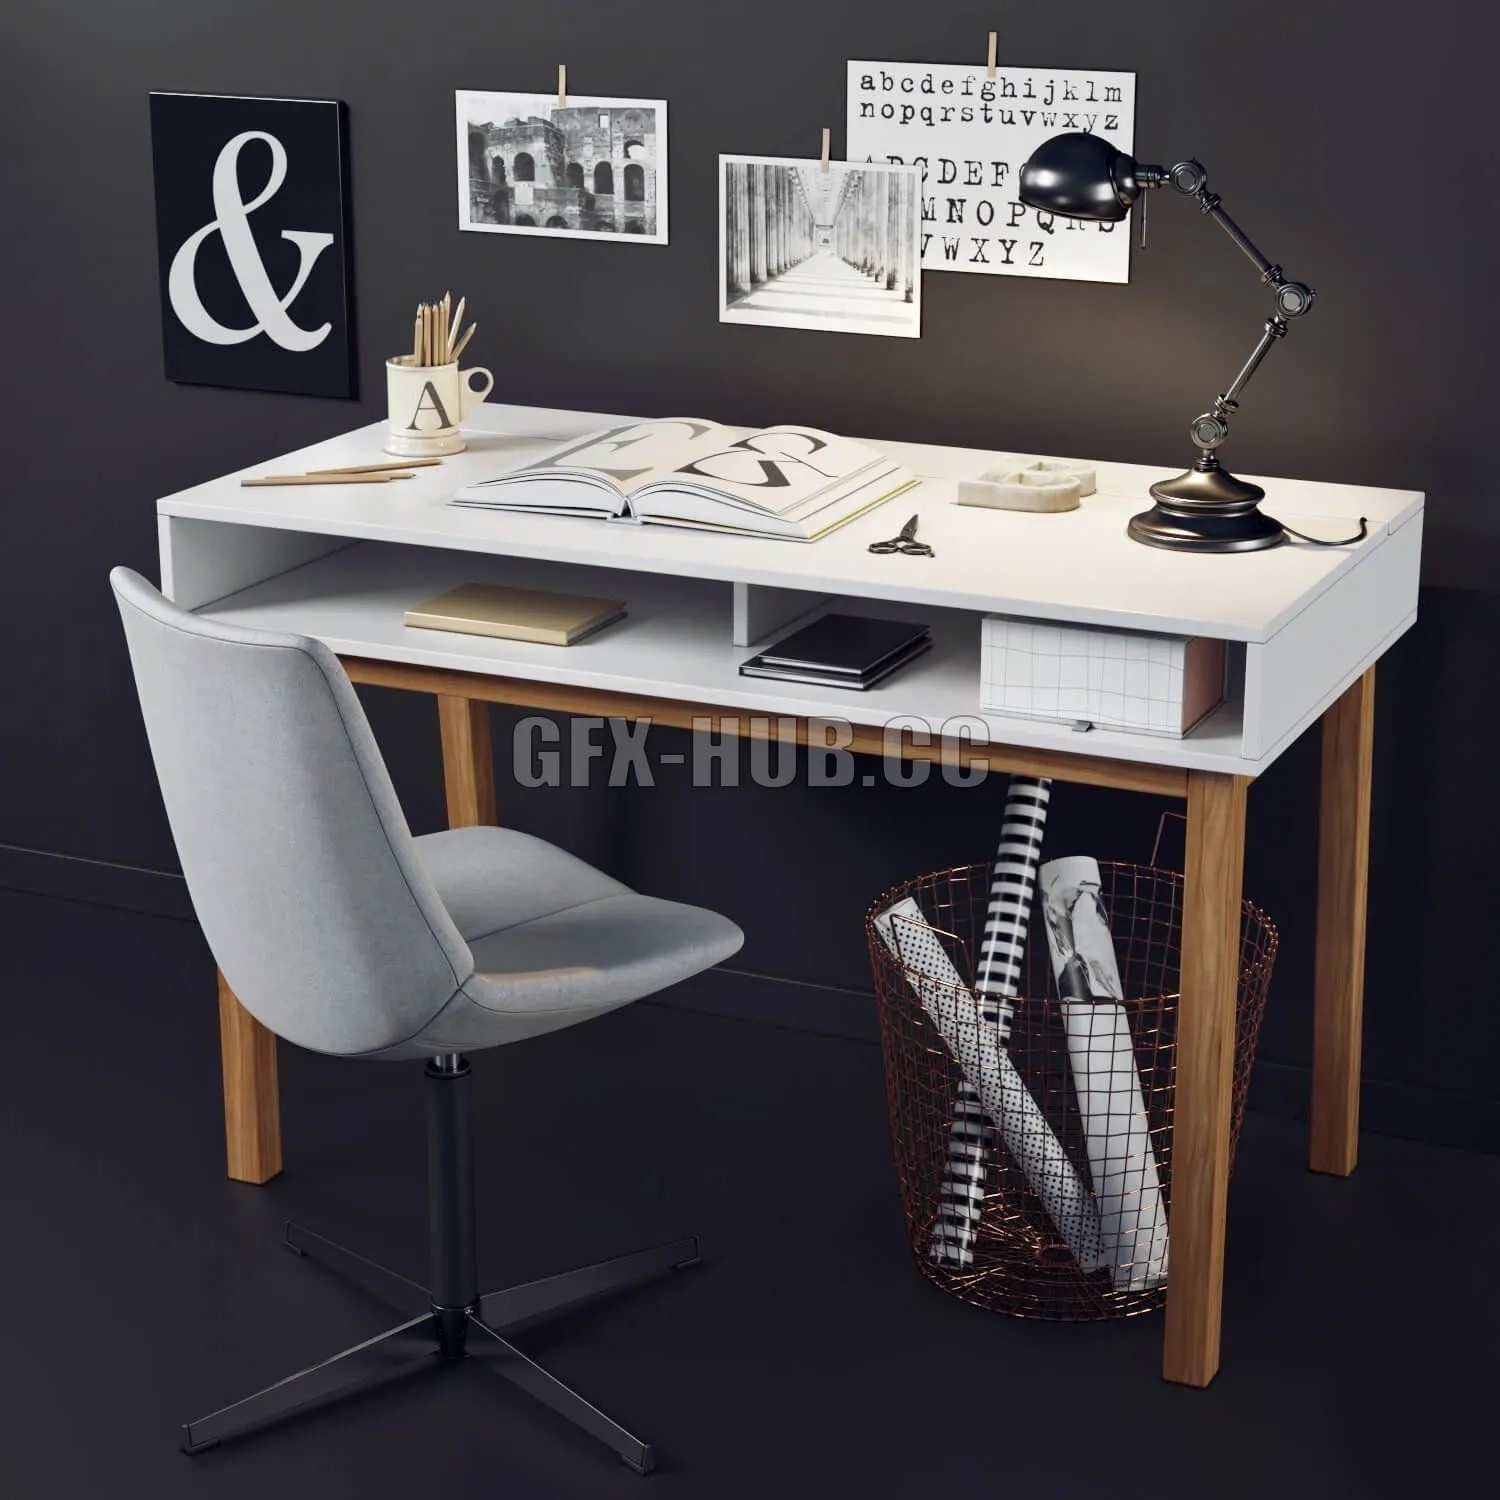 Desk and chair with La Redoute decor – 212453